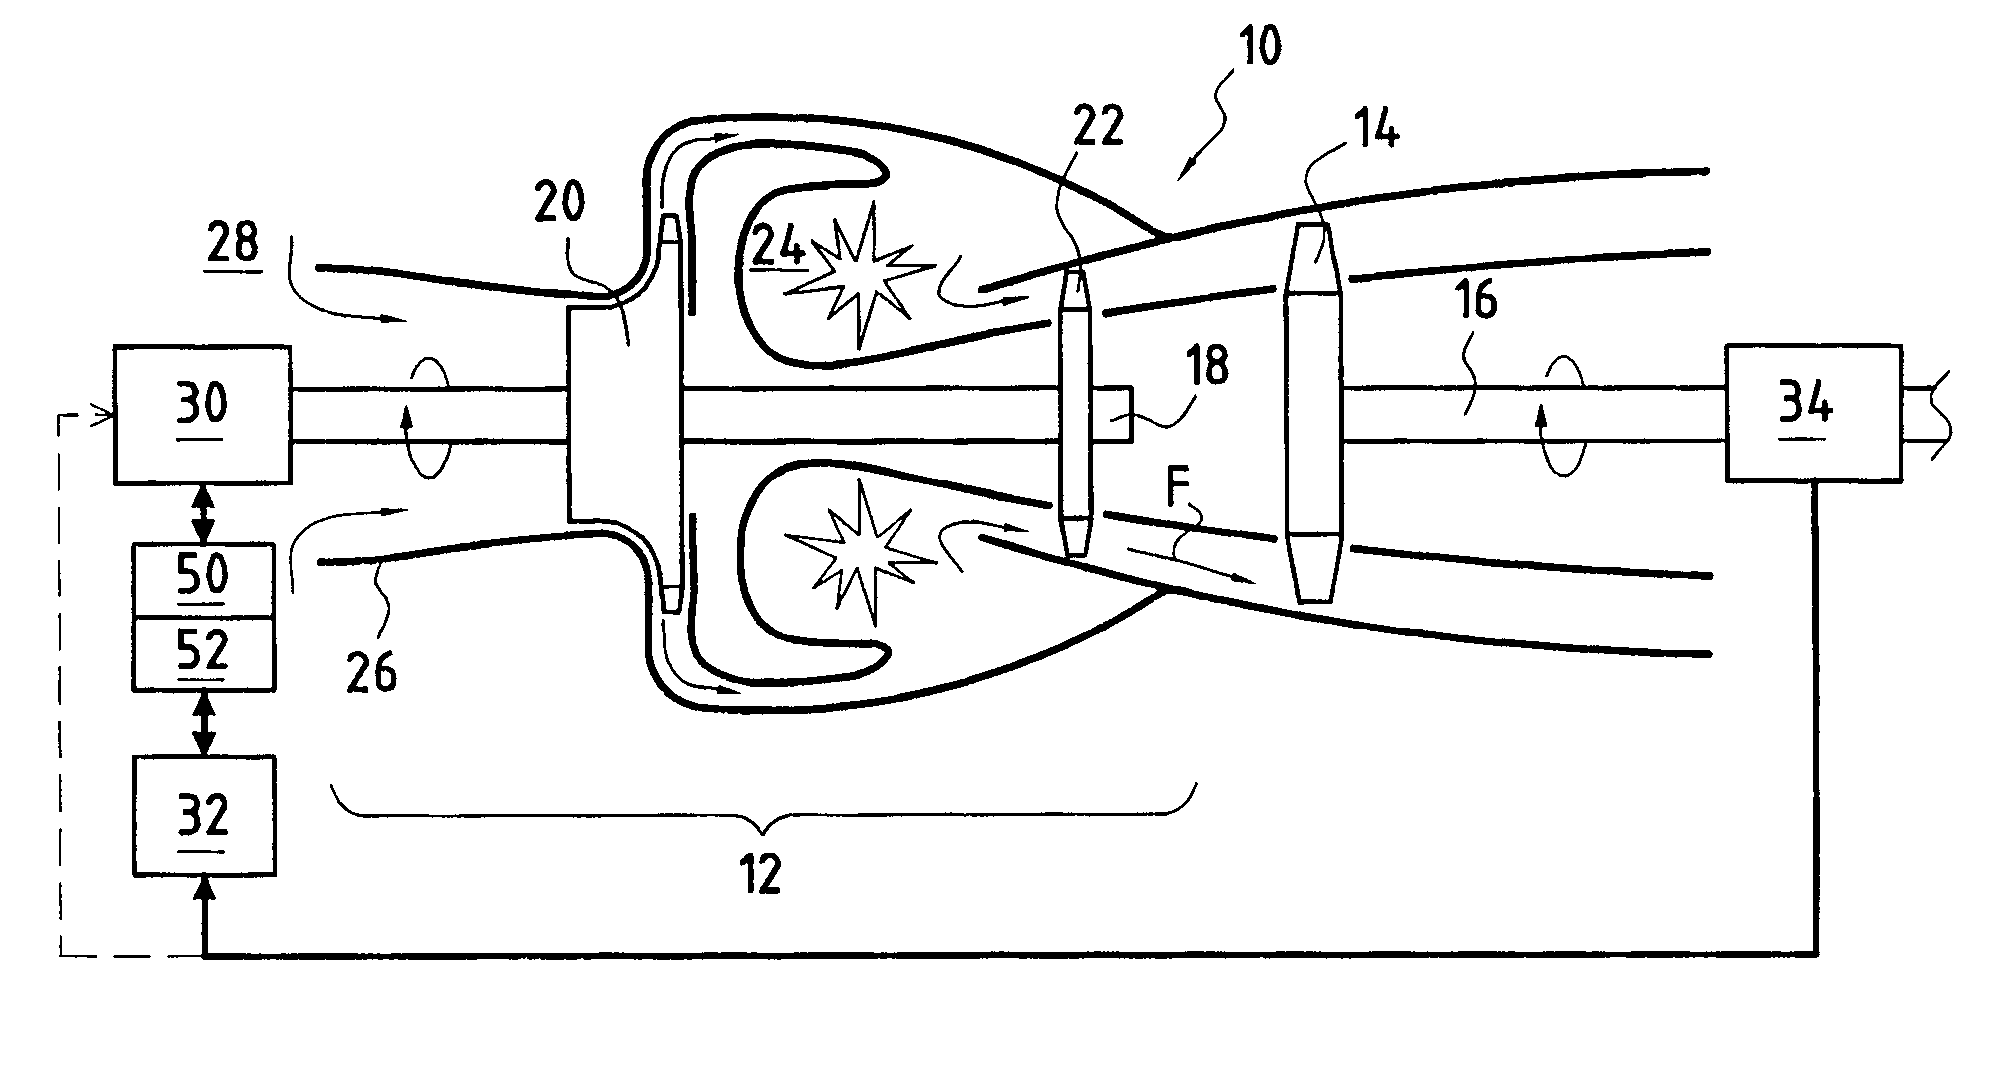 Assistance device for transient acceleration and deceleration phases